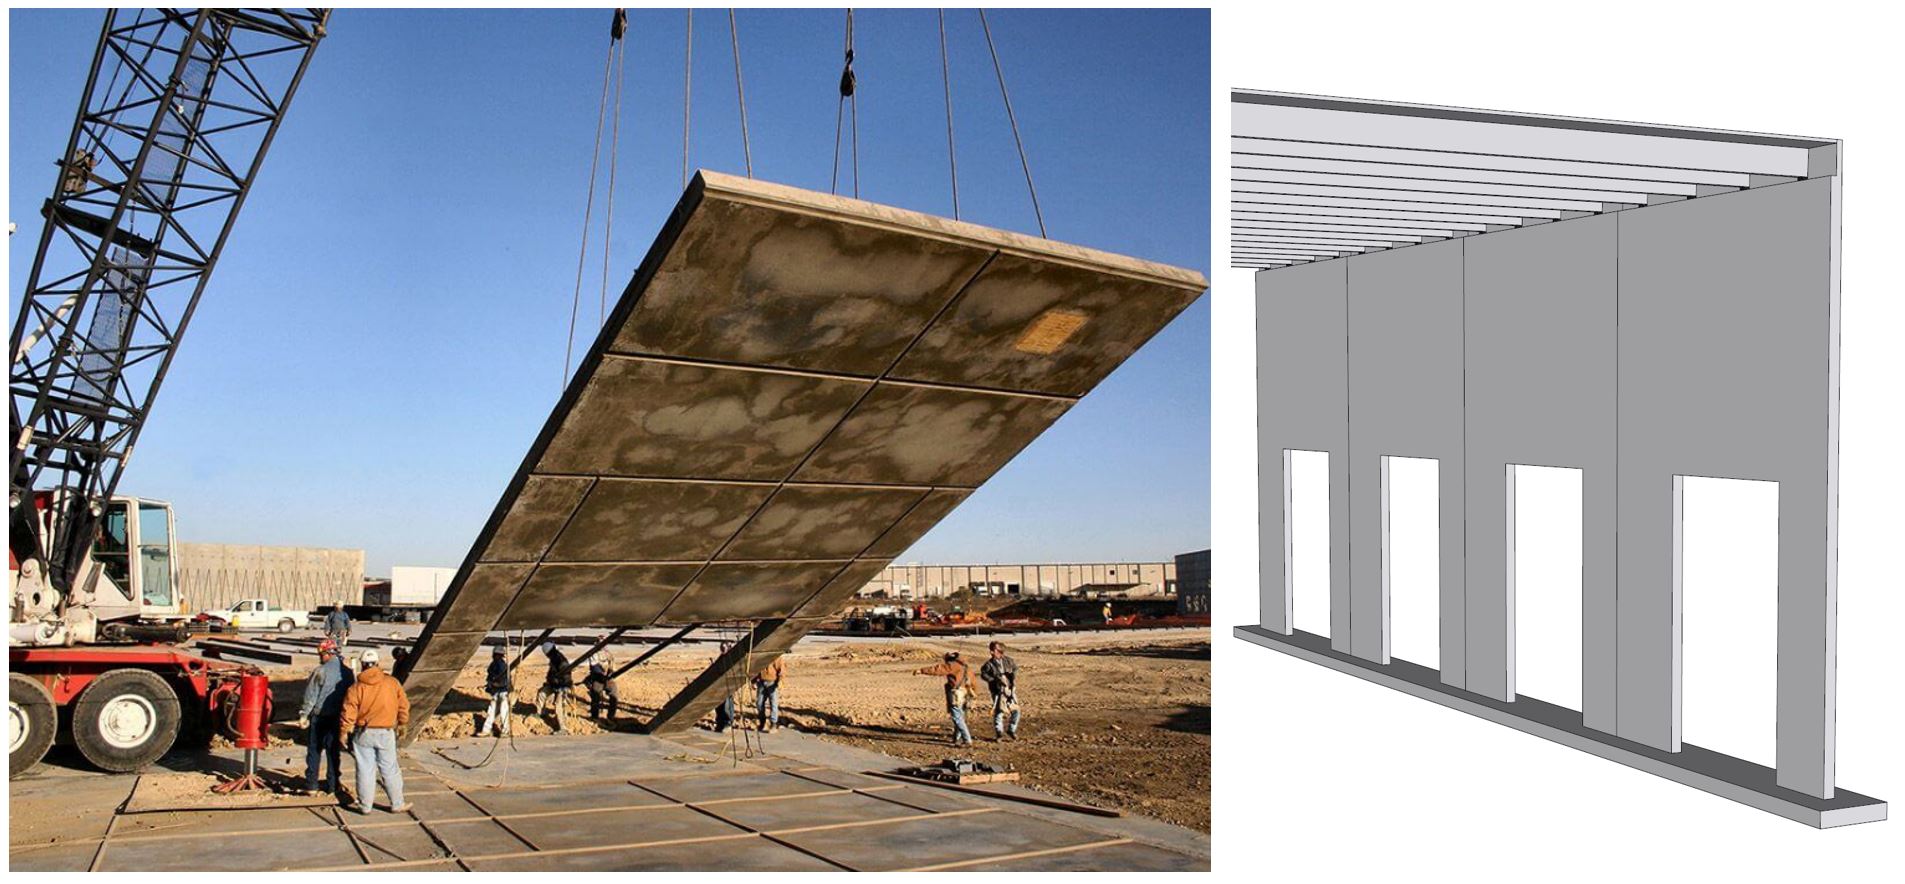 Reinforced Concrete Tilt-up Wall Panels with Openings